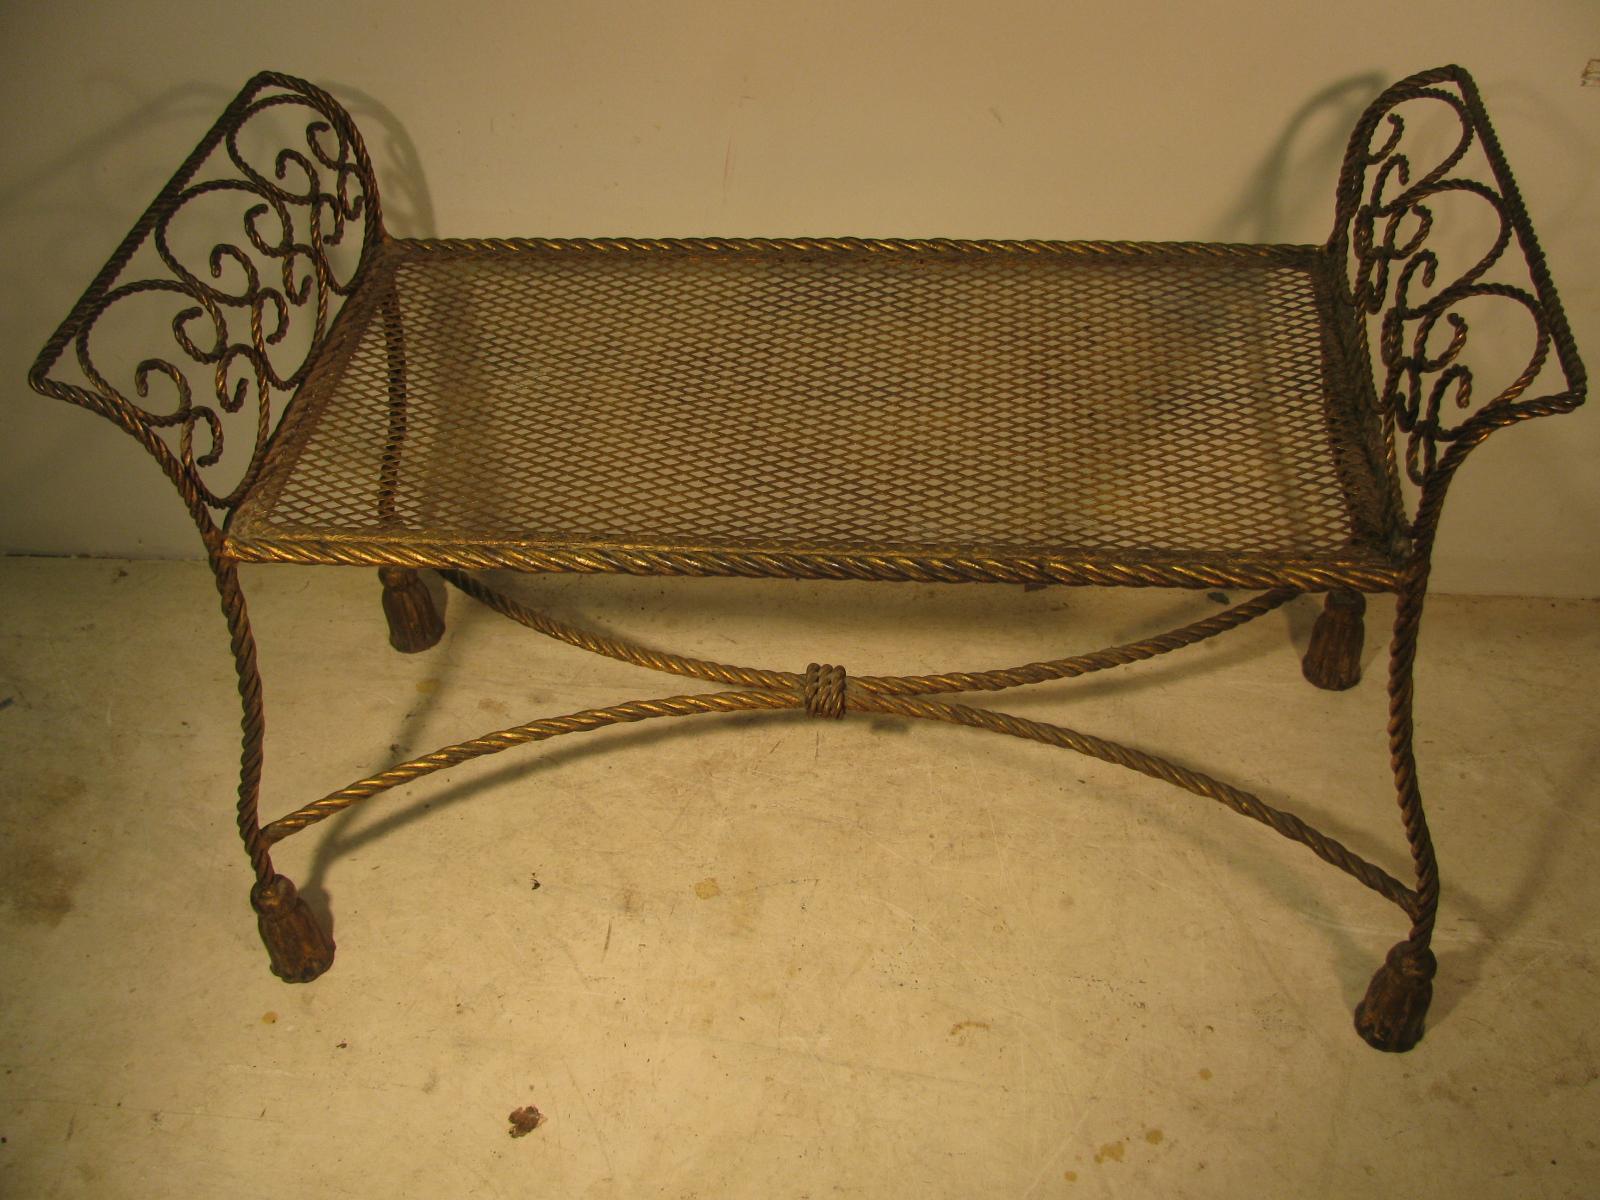 Exceptional gilt iron rope and tassel bench. Many places to use this wonderful piece, bedroom, bathroom , hallway, vanity, by a window. In excellent vintage condition with minimal wear.